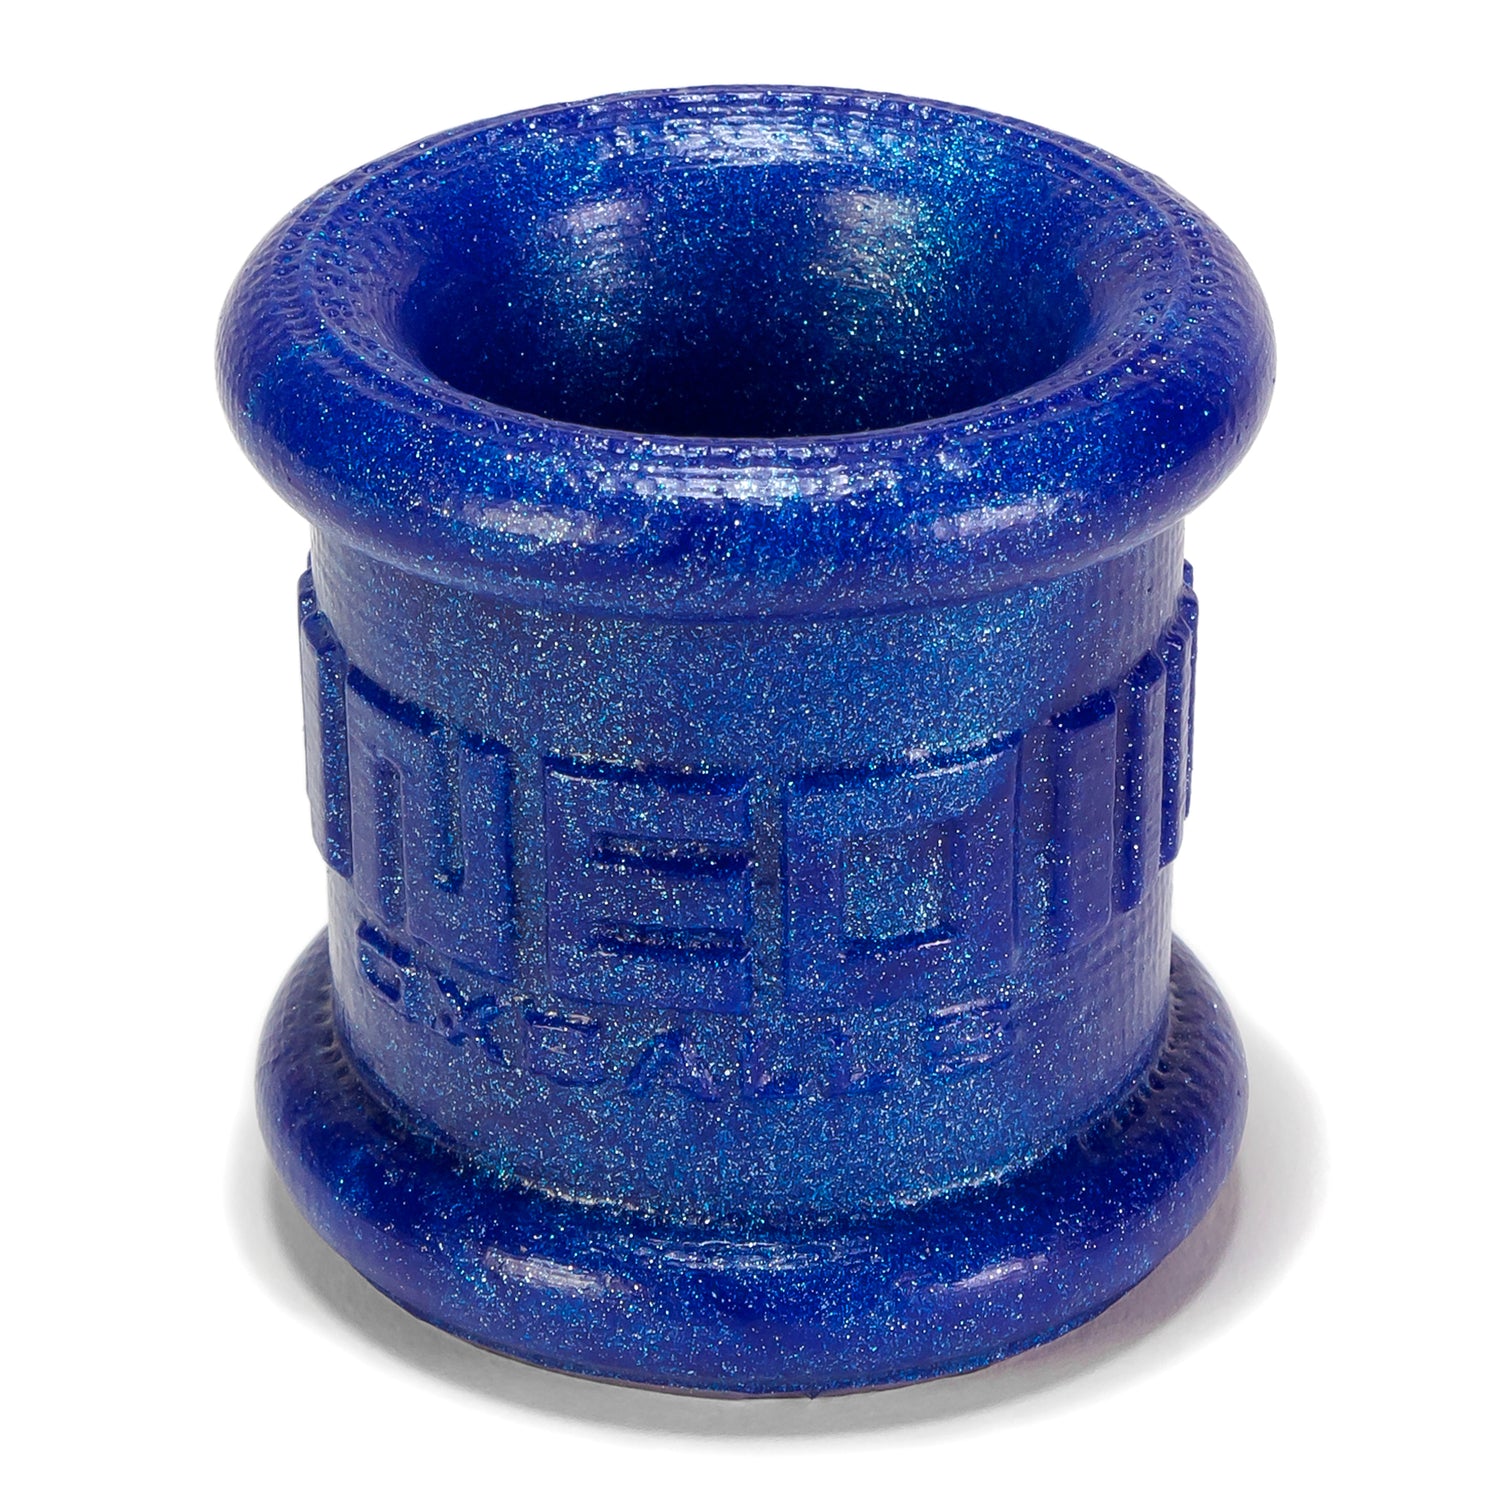 Neo Tall Ballstretcher Blue - Just for you desires